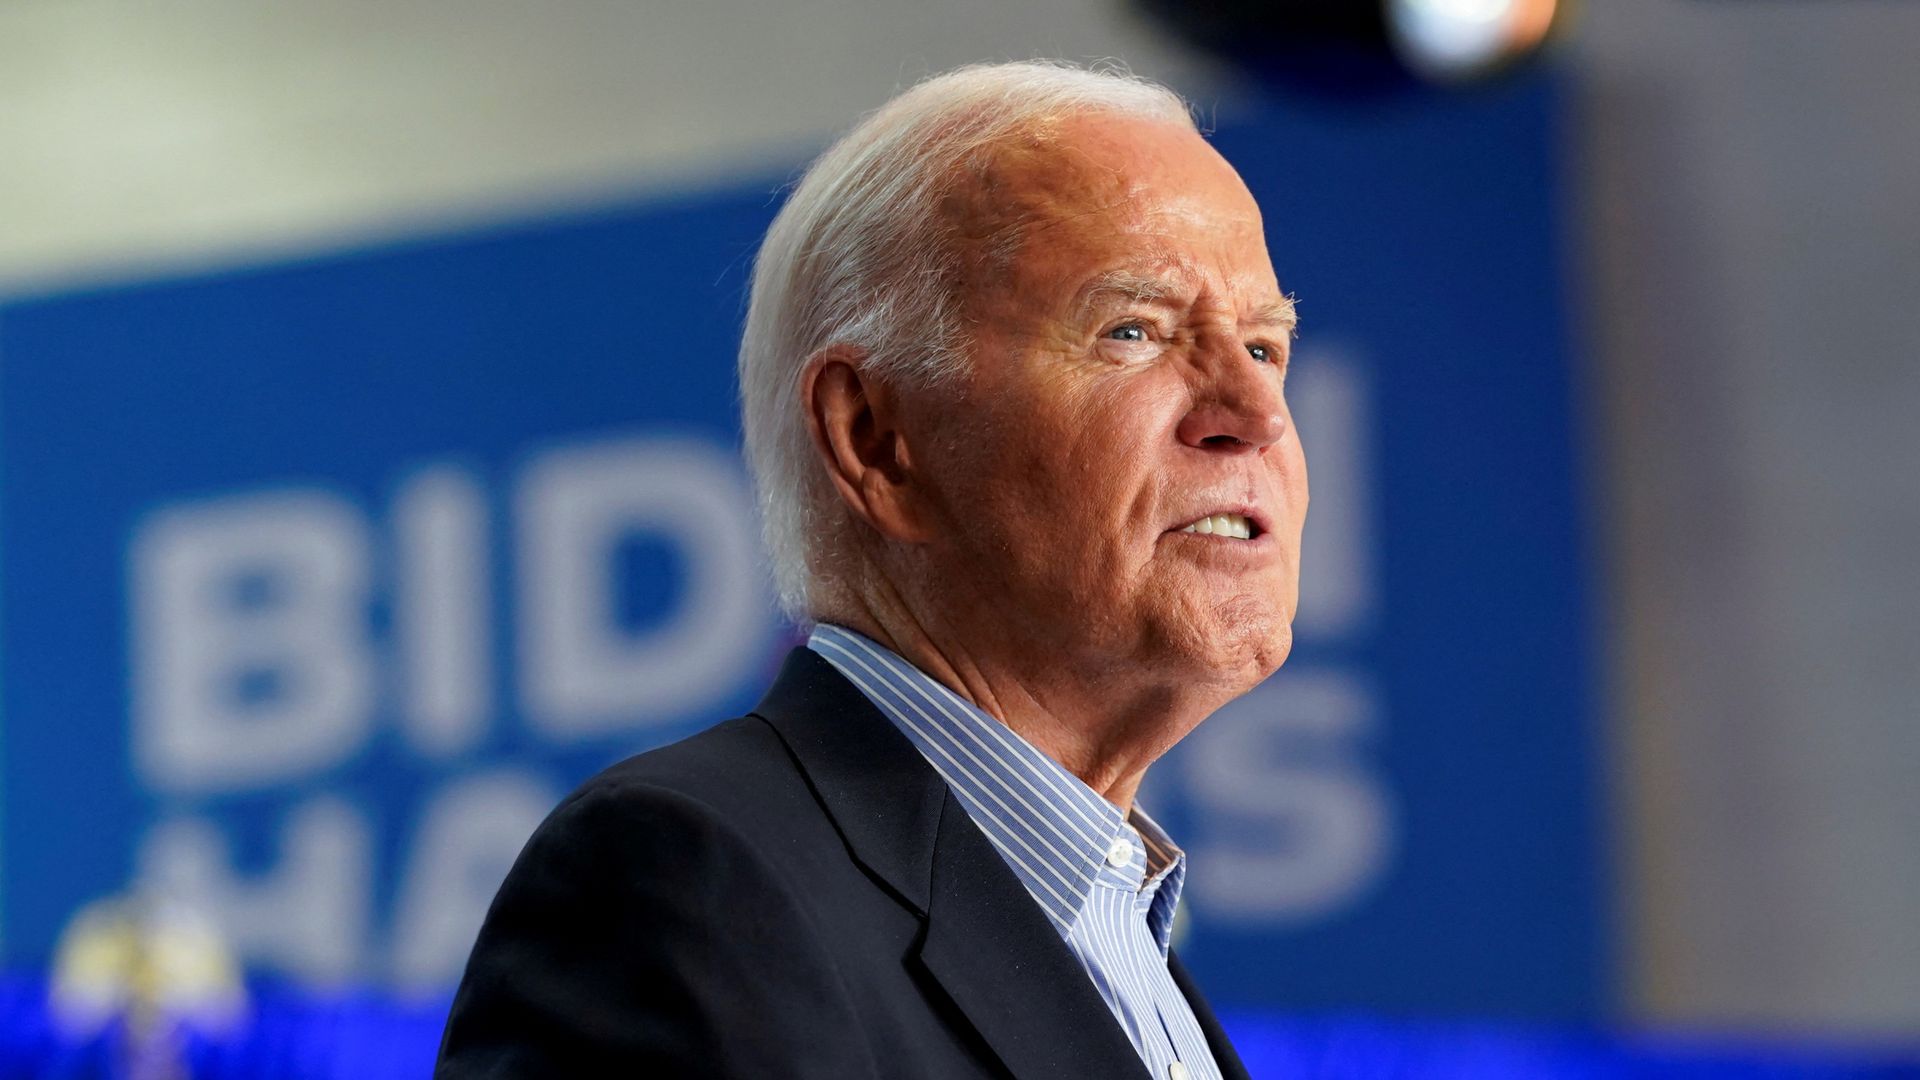 Biden vows 'I'm staying in the race' amid speculation over his future